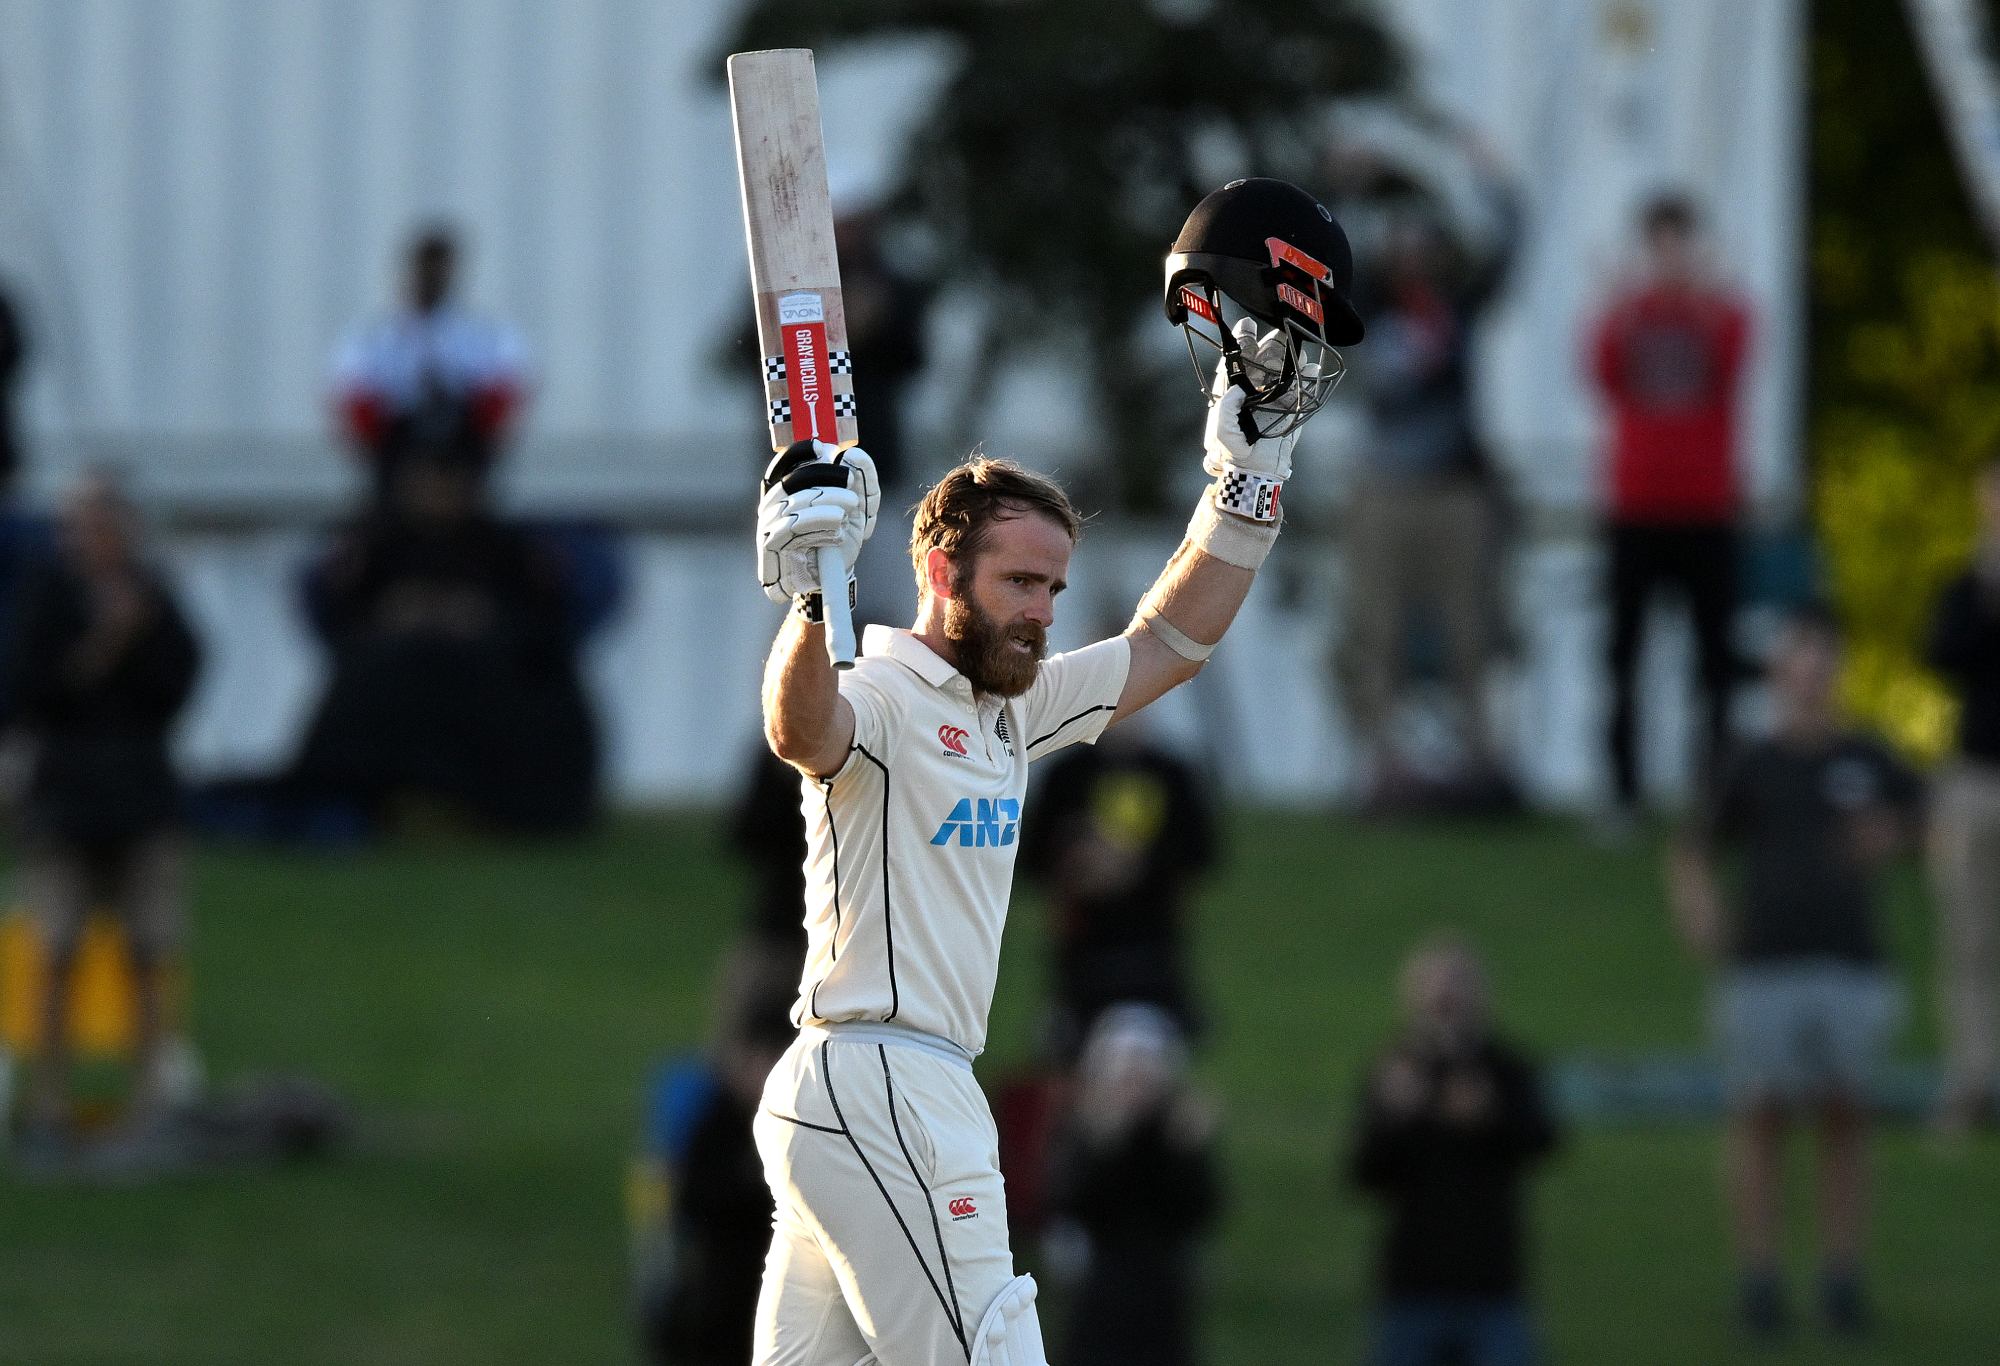 CHRISTCHURCH, NEW ZEALAND - MARCH 13: Kane Williamson of New Zealand raises his bat after scoring a century during day five of the First Test match in the series between New Zealand and Sri Lanka at Hagley Oval on March 13, 2023 in Christchurch, New Zealand. (Photo by Joe Allison/Getty Images)